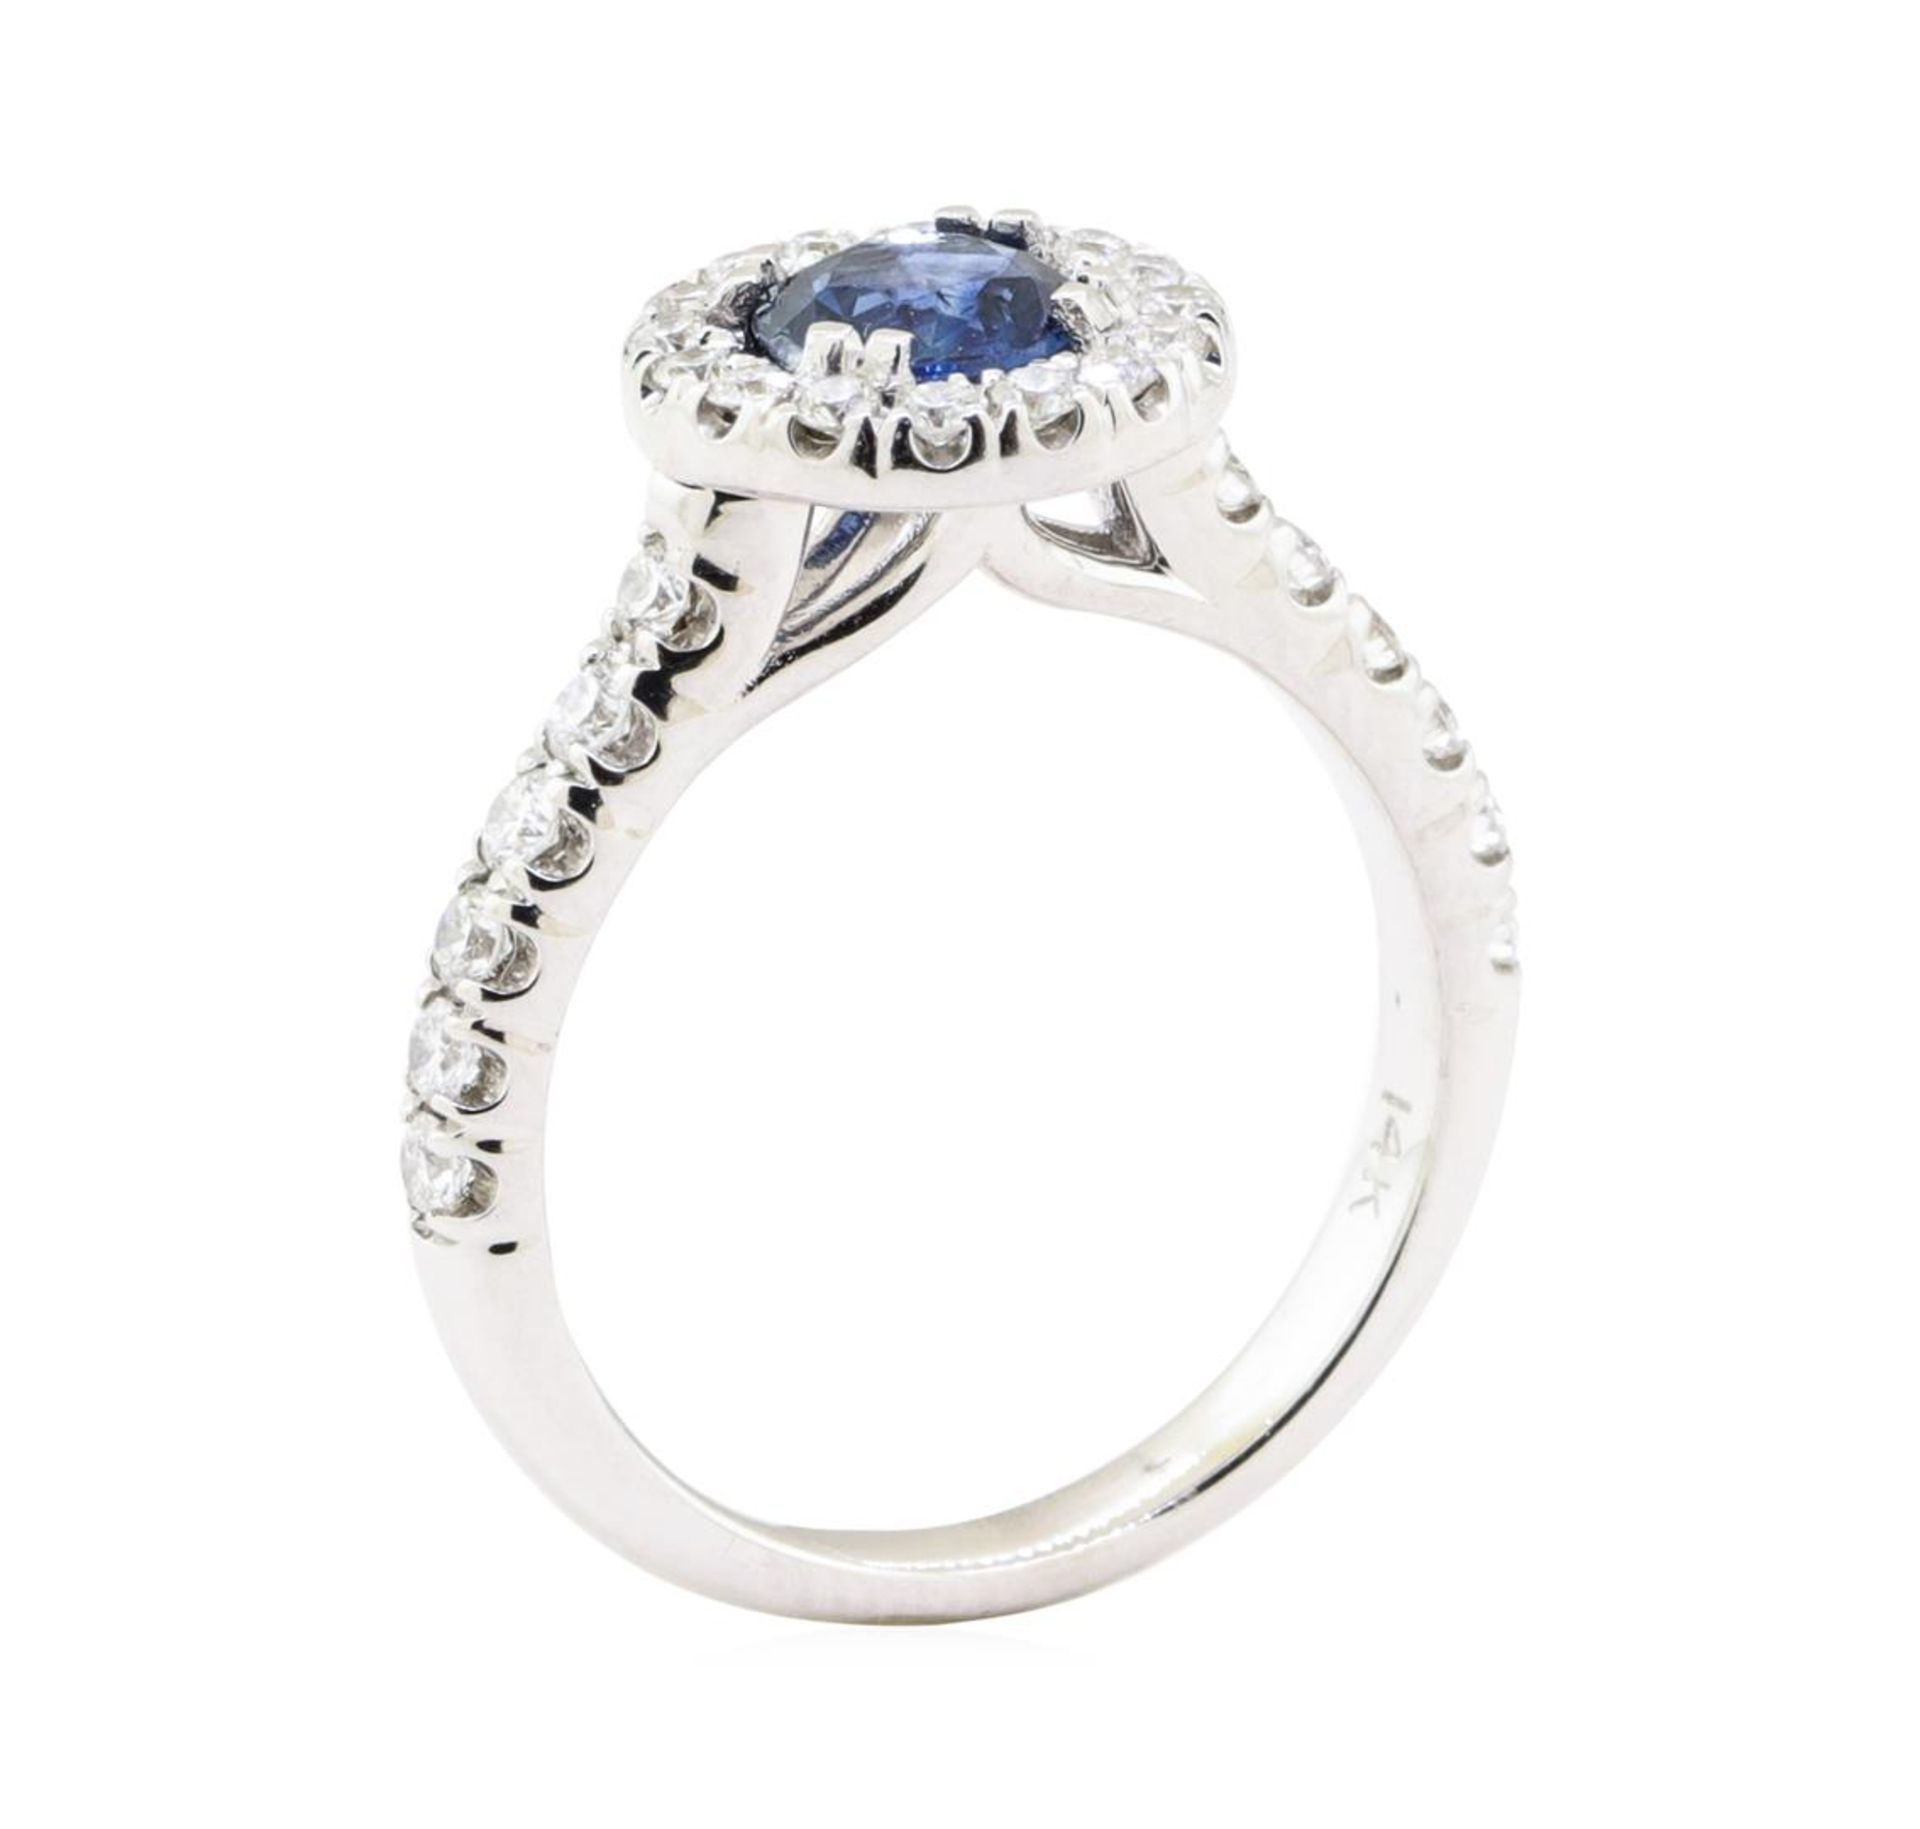 1.42 ctw Sapphire And Diamond Ring - 14KT White Gold - Image 4 of 5